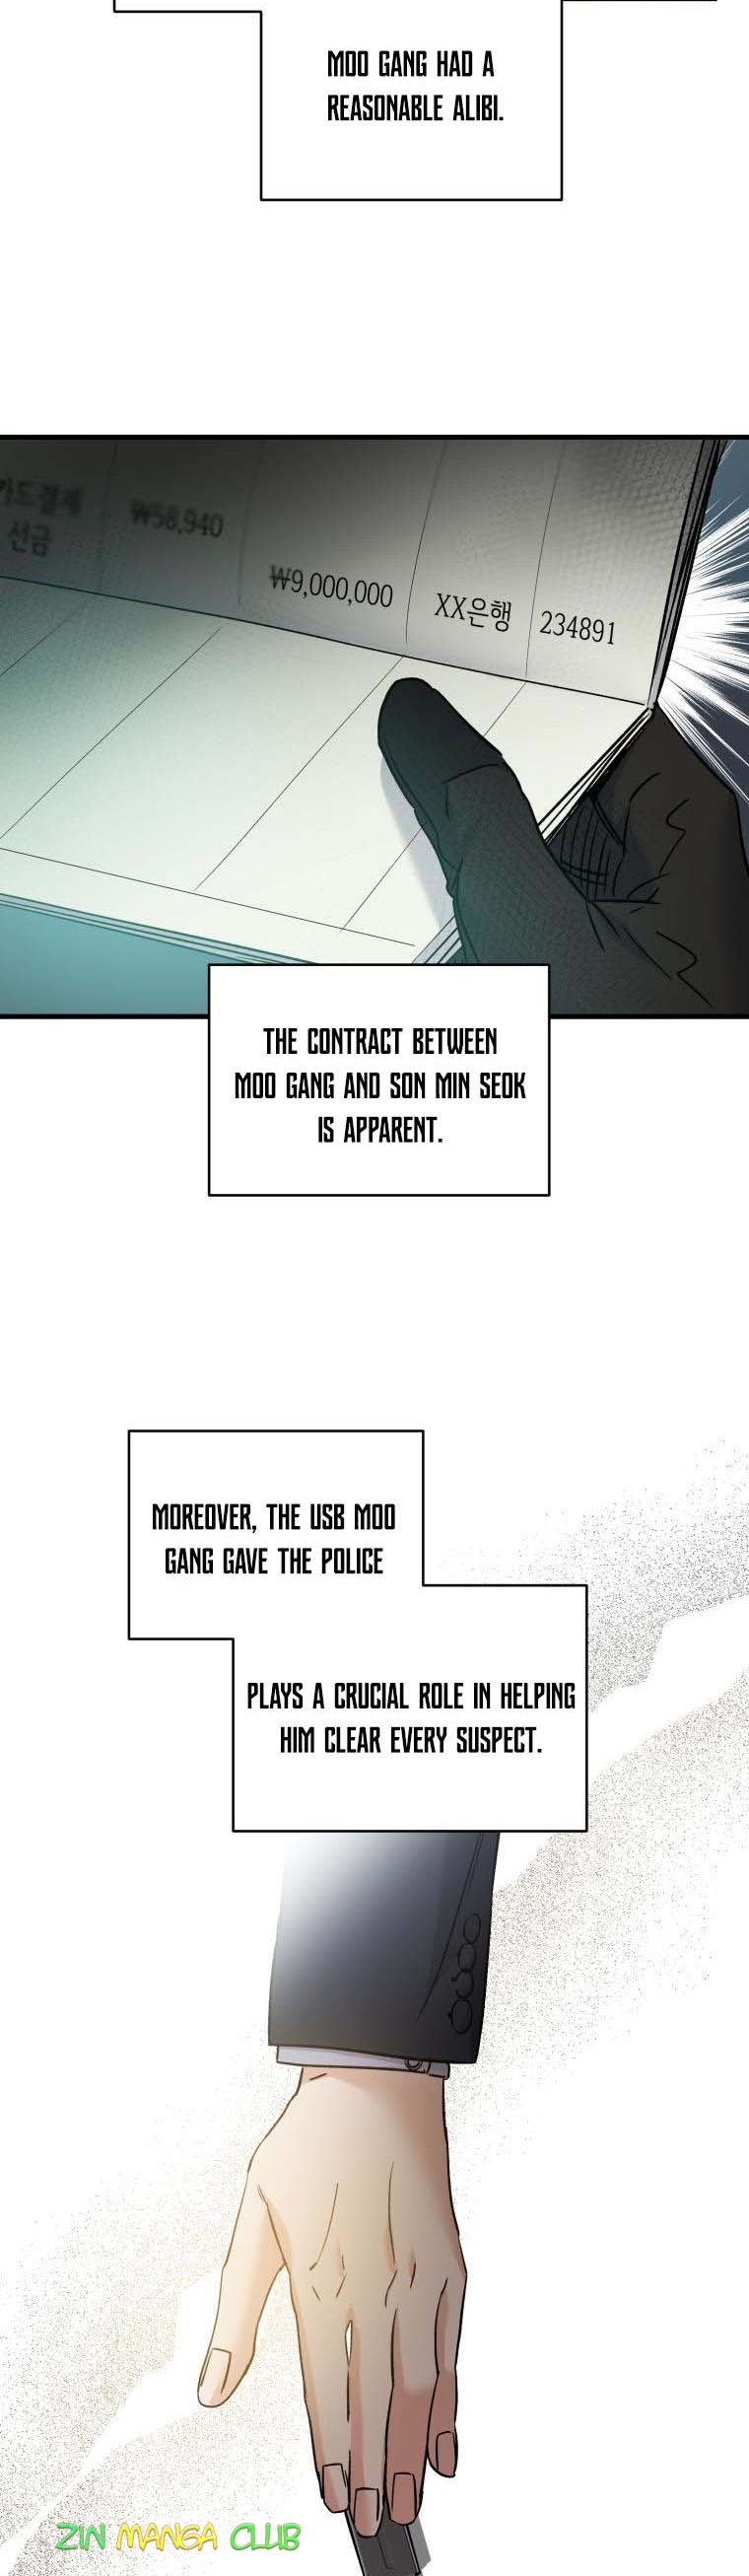 Marriage Instead Of Death - Page 2